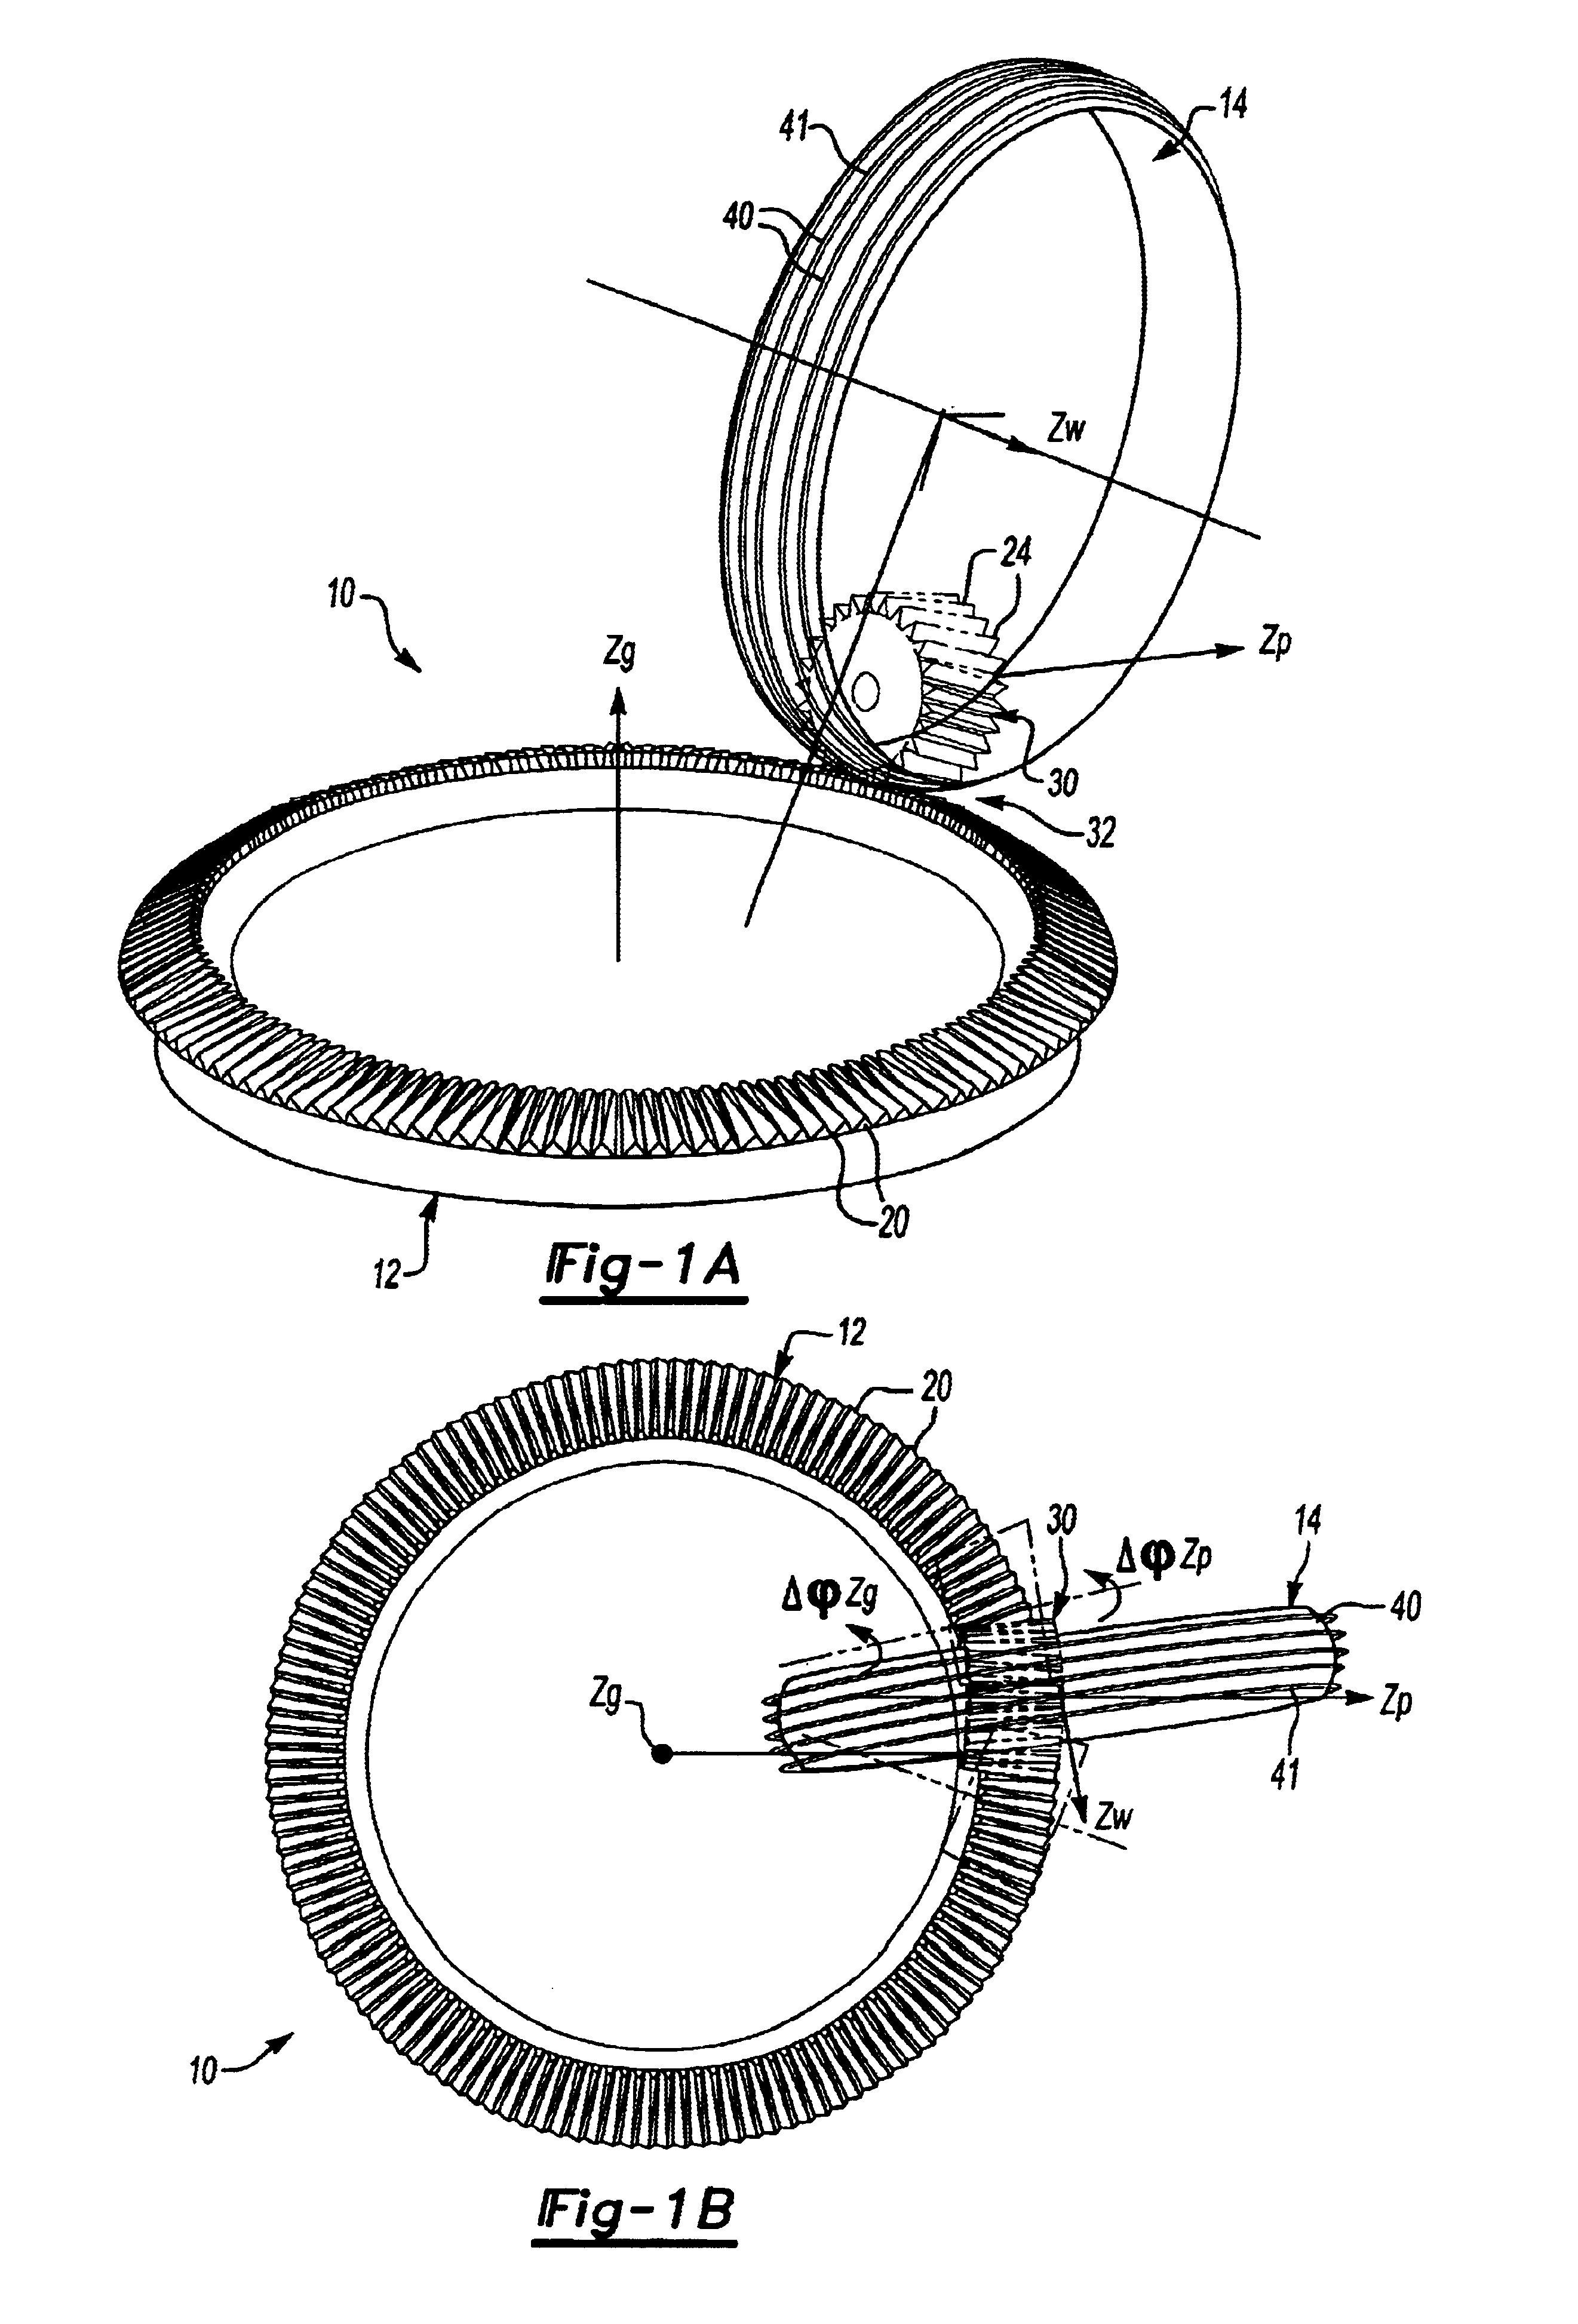 Method for forming a grinding worm for forming a conical face gear that meshes with a conical involute pinion